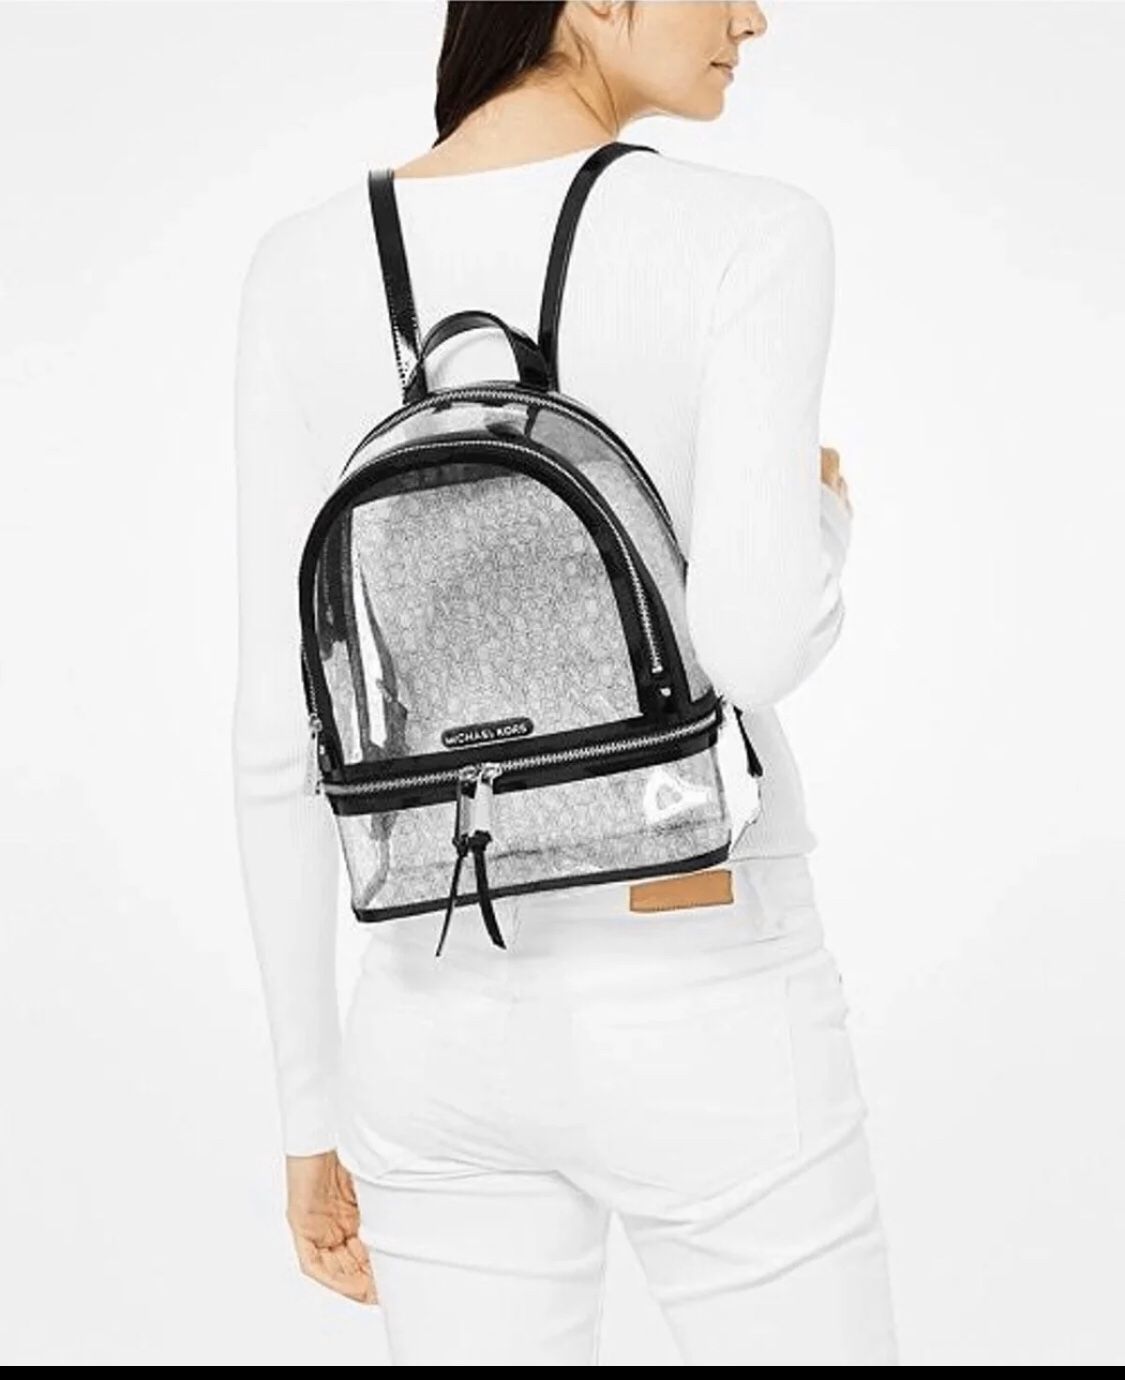 Only $60! NEW Michael Kors Backpack